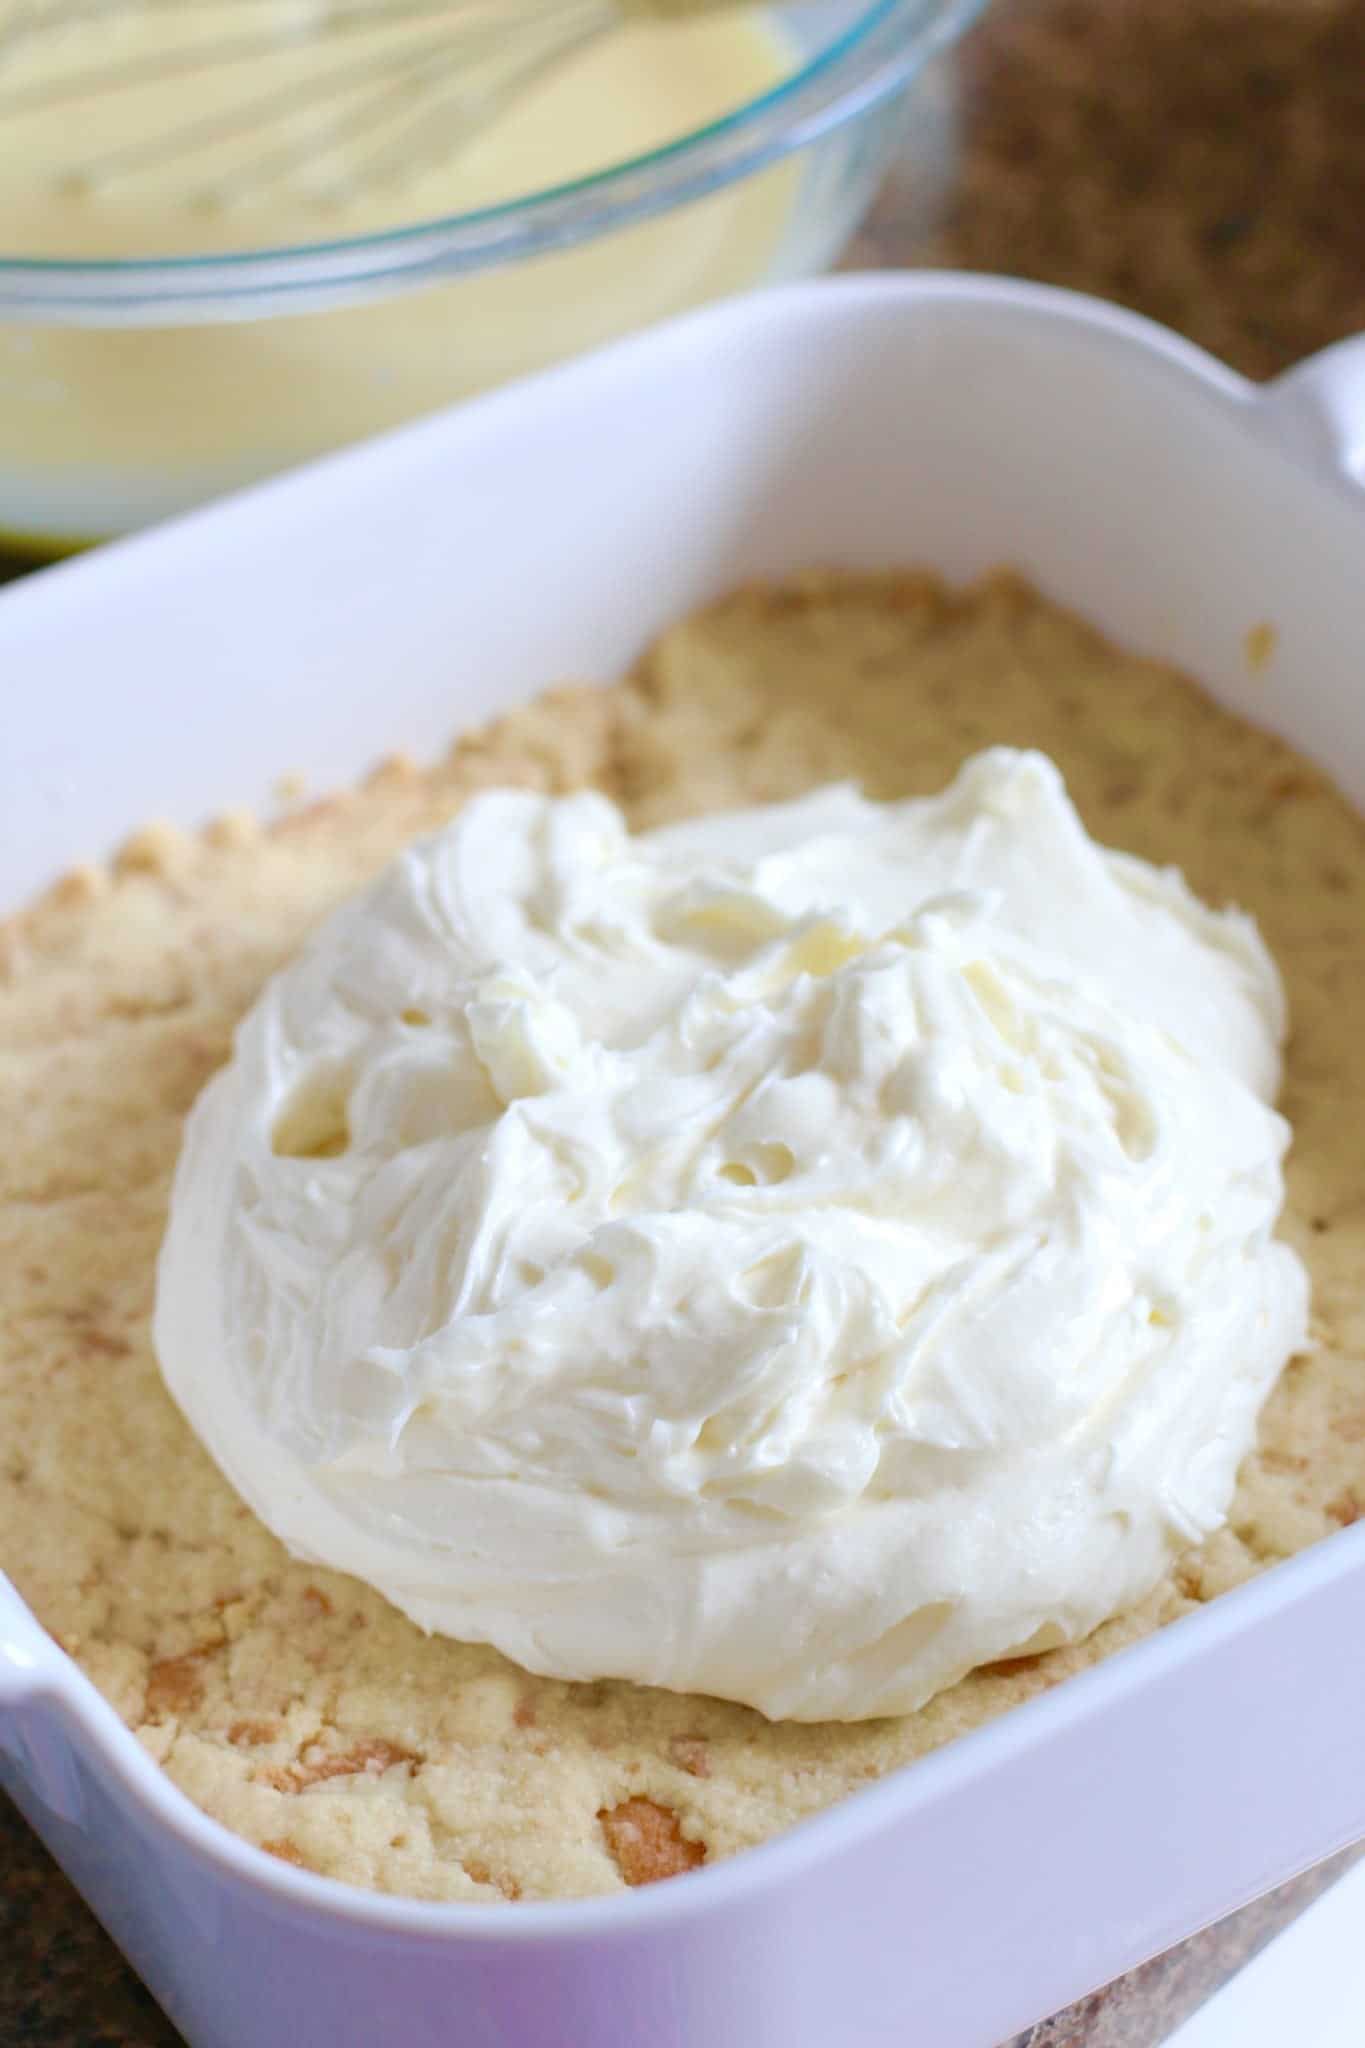 cream cheese mixture spread on a baked Nilla wafer crust.